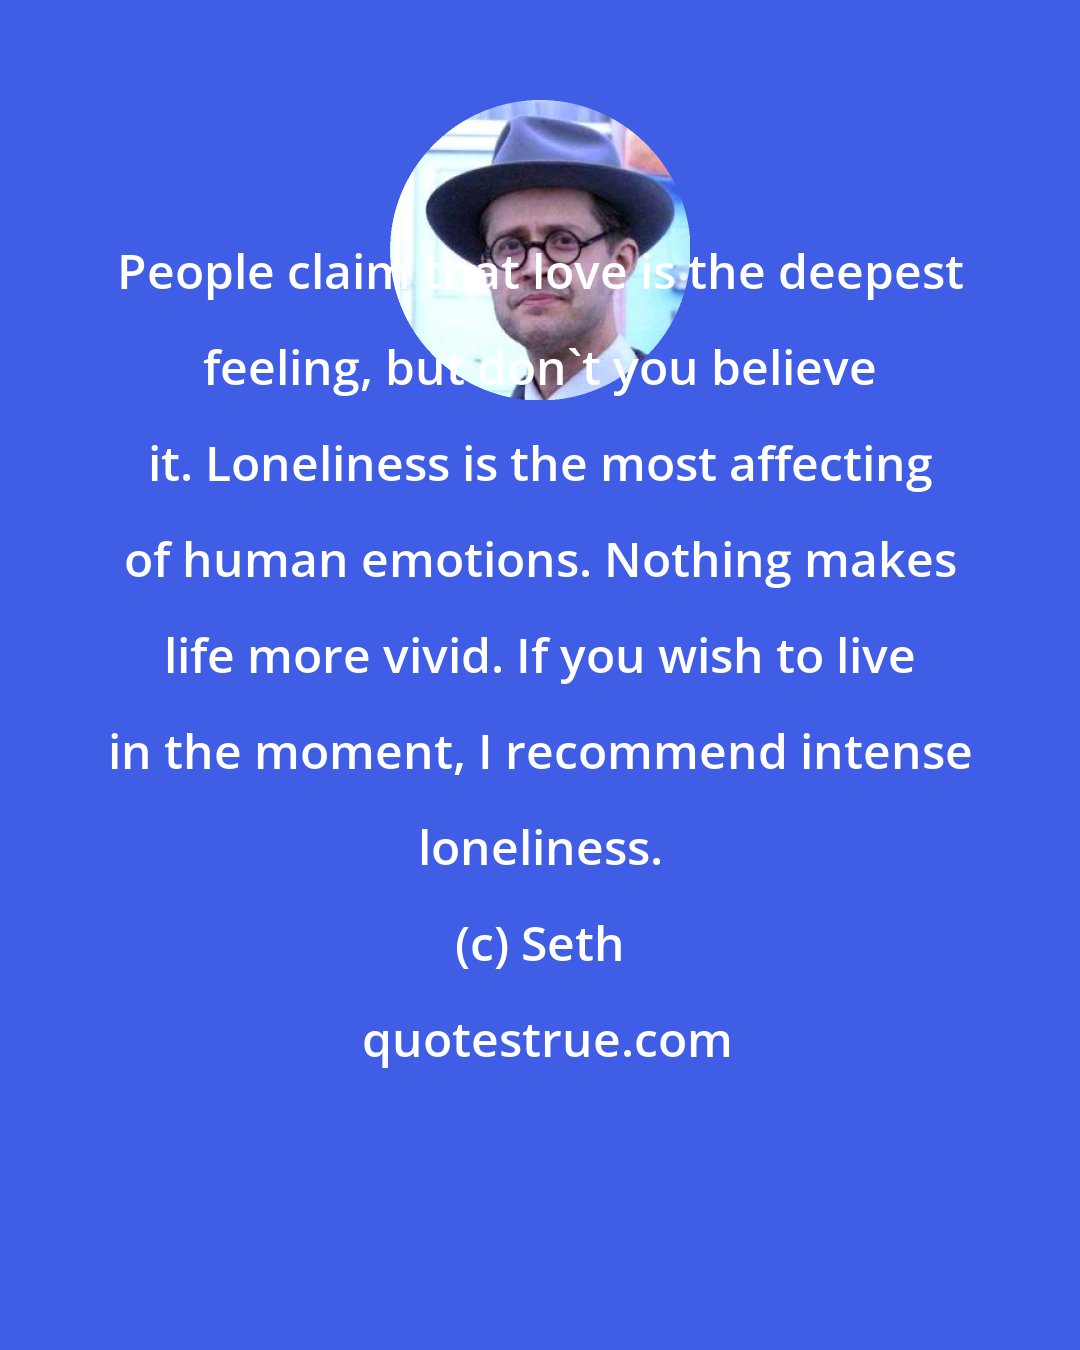 Seth: People claim that love is the deepest feeling, but don't you believe it. Loneliness is the most affecting of human emotions. Nothing makes life more vivid. If you wish to live in the moment, I recommend intense loneliness.